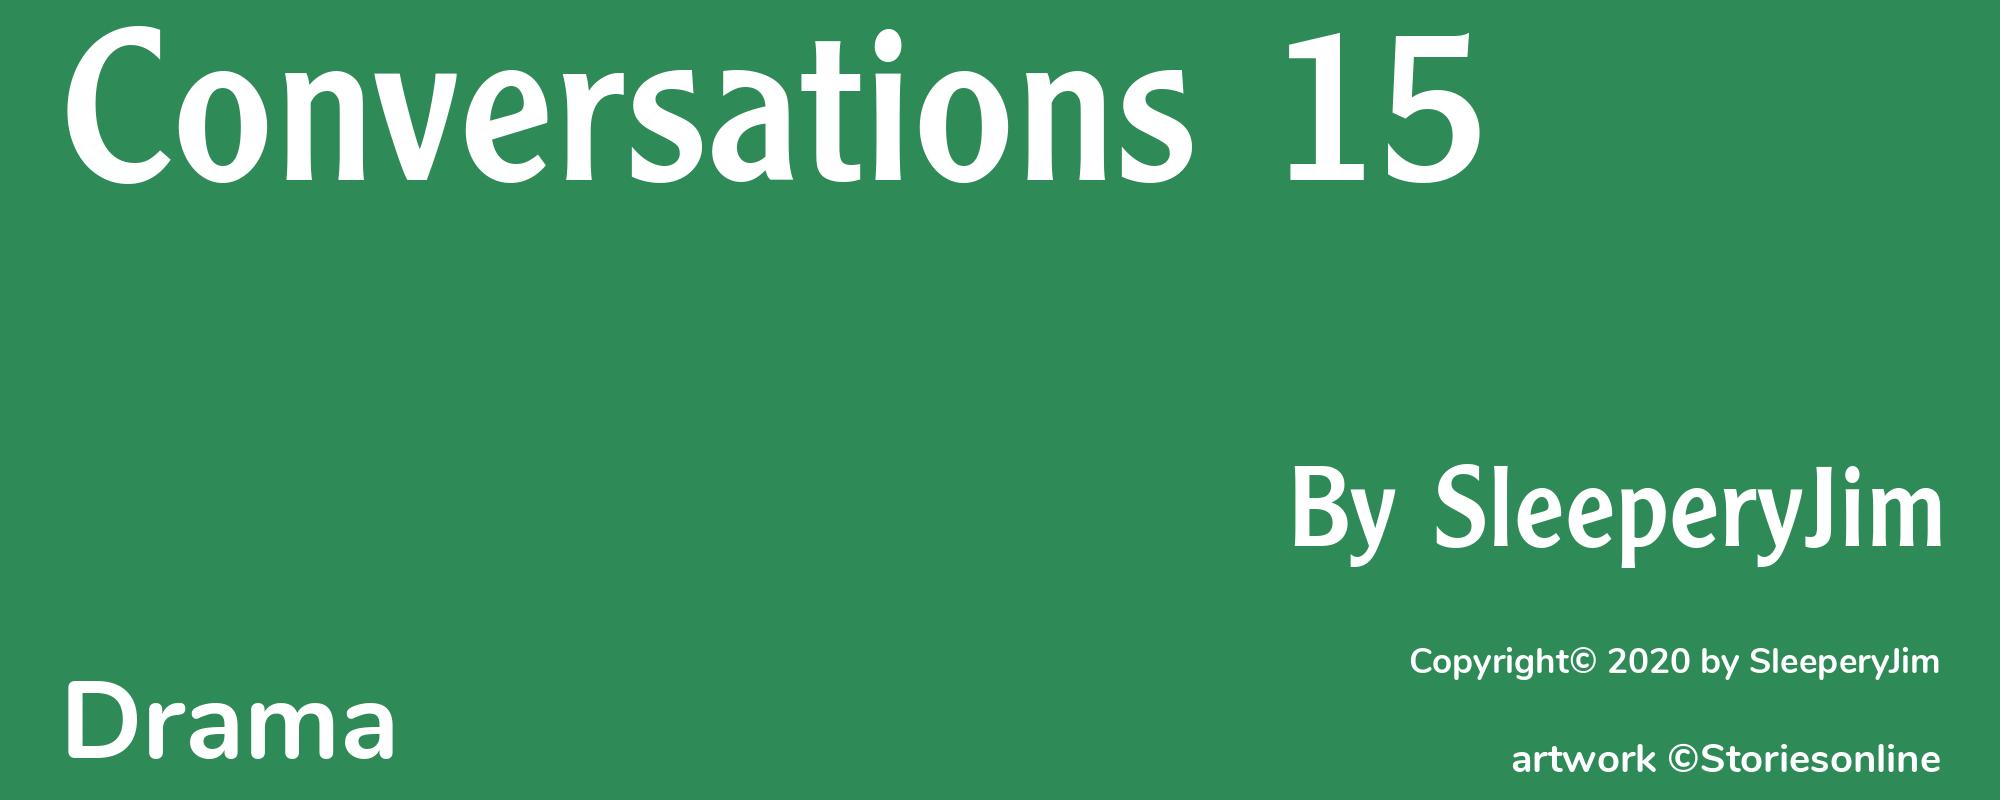 Conversations 15 - Cover